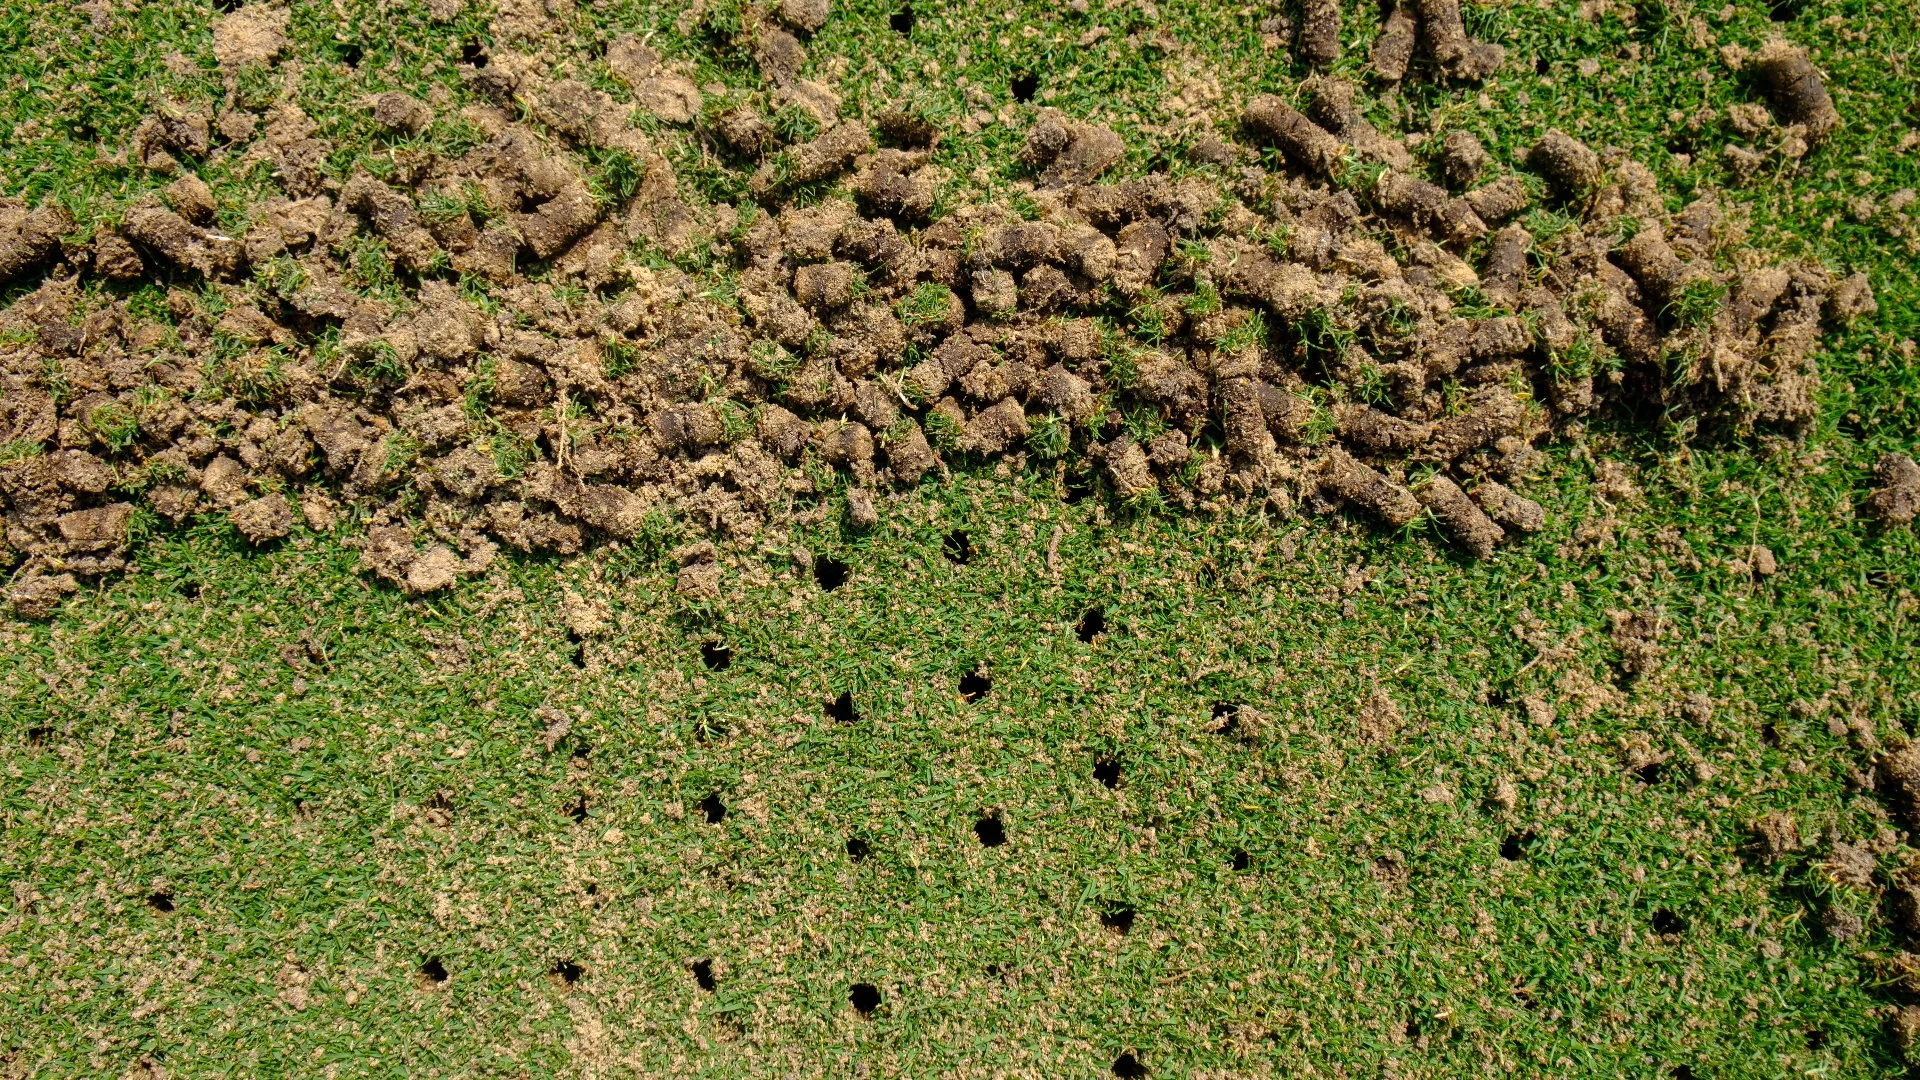 Don't Worry - The Clumps of Soil on Your Lawn After Aeration Is Normal!